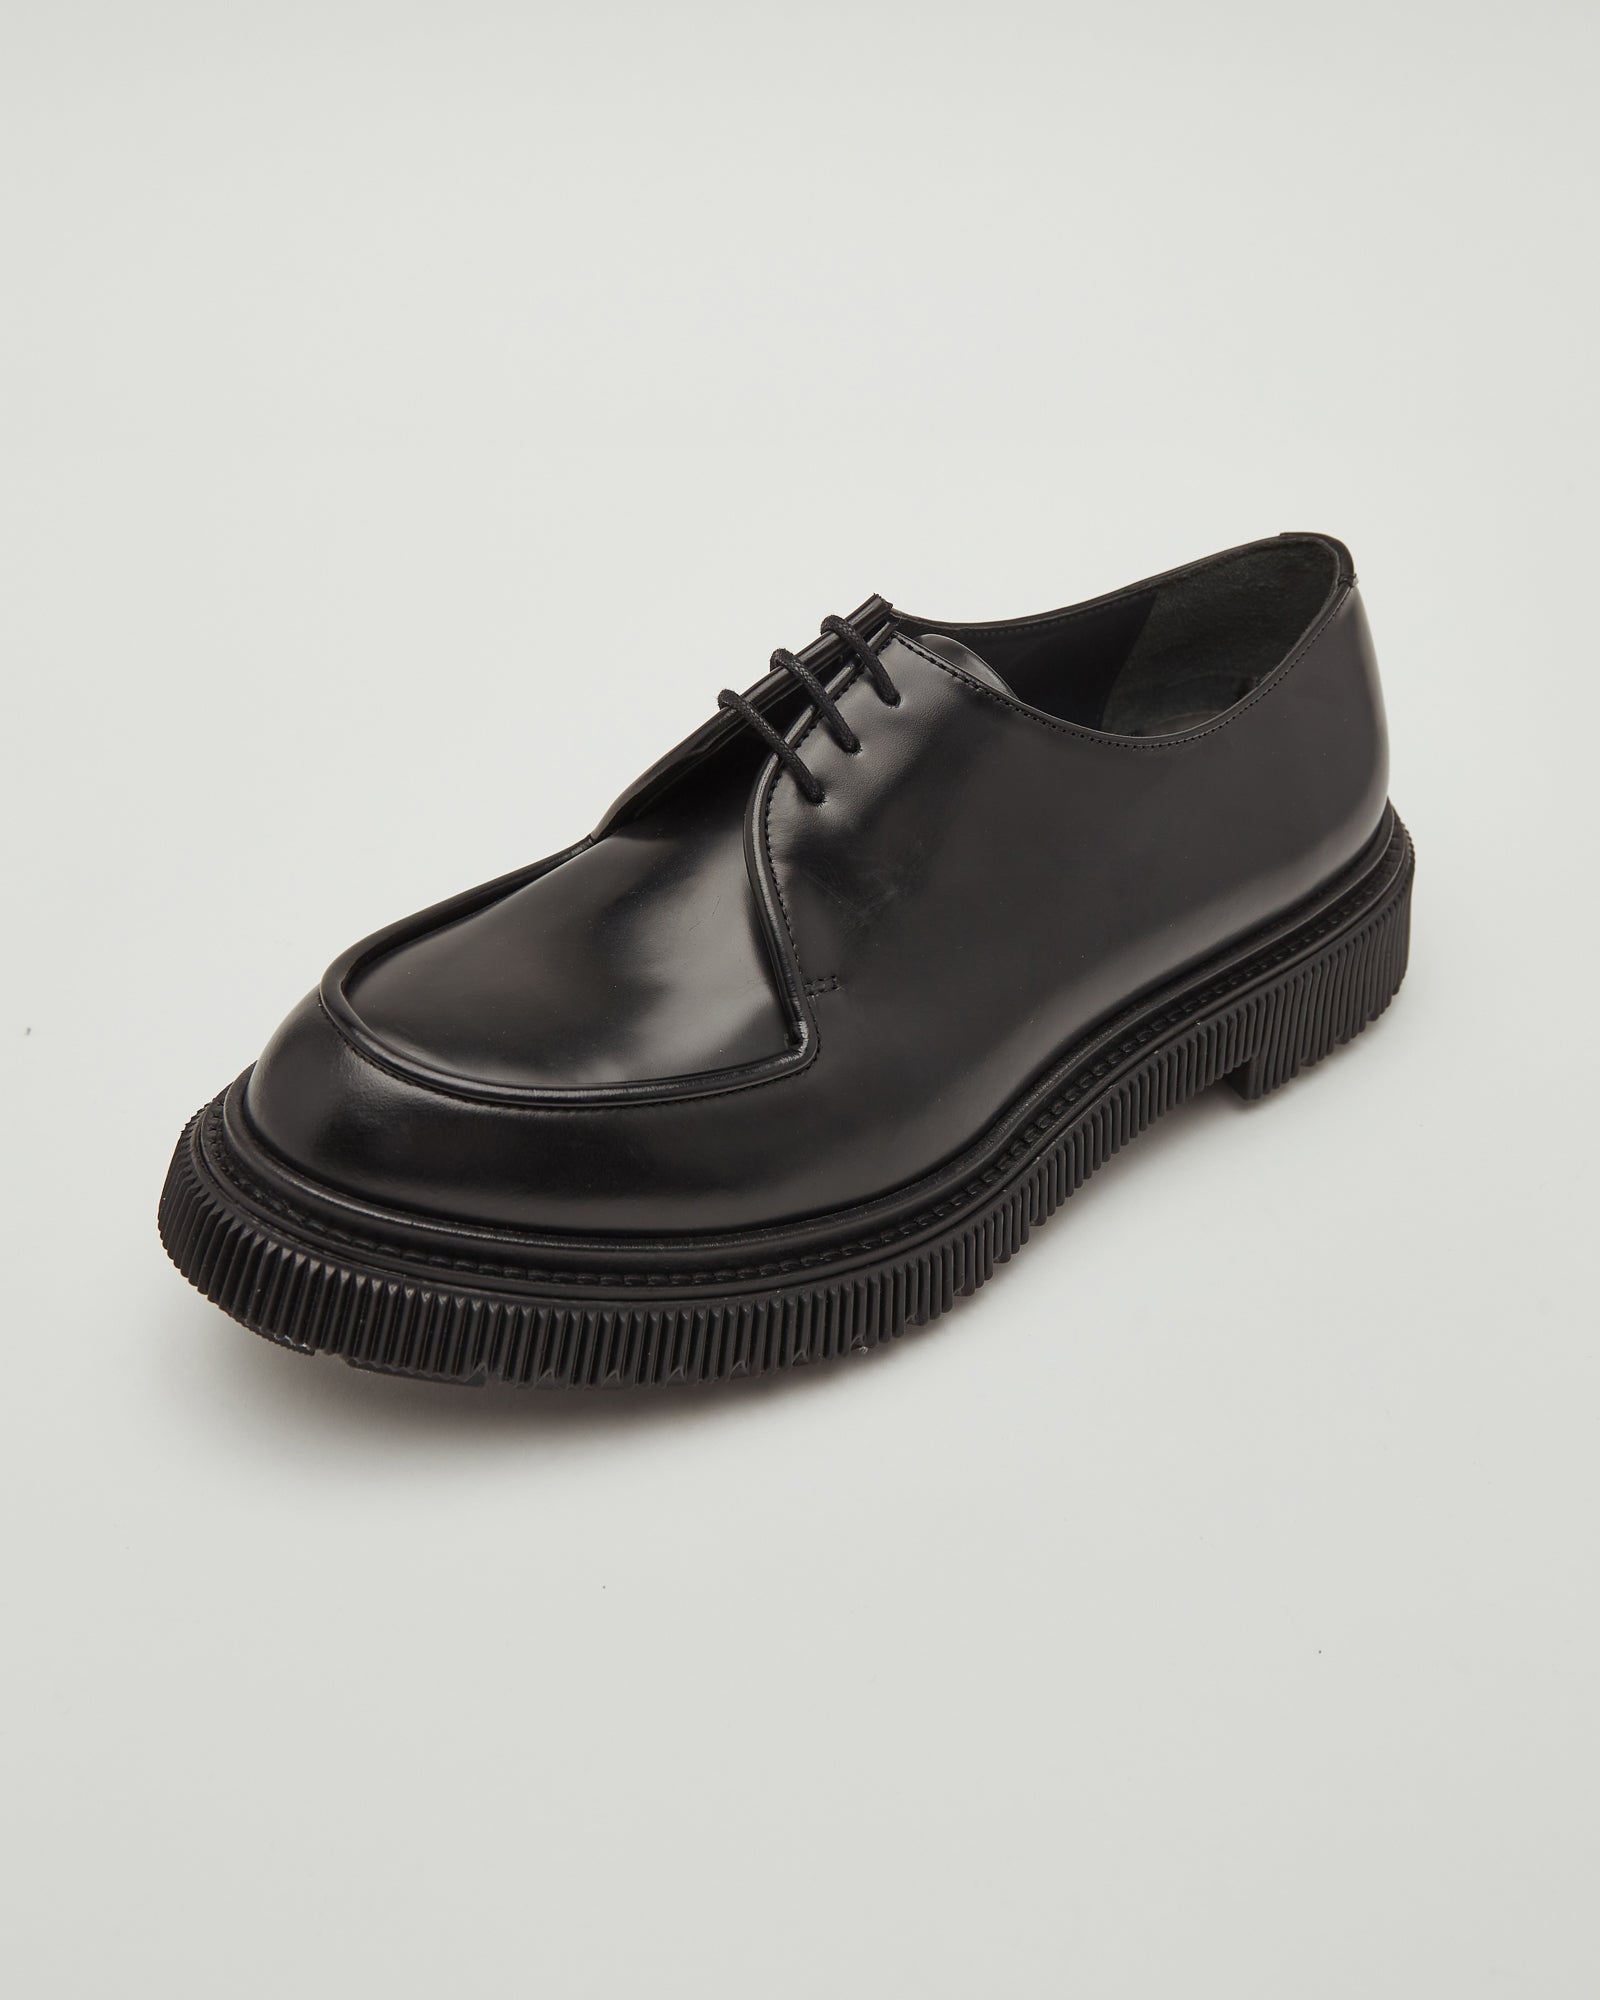 Type 124 Derby Shoes in Black